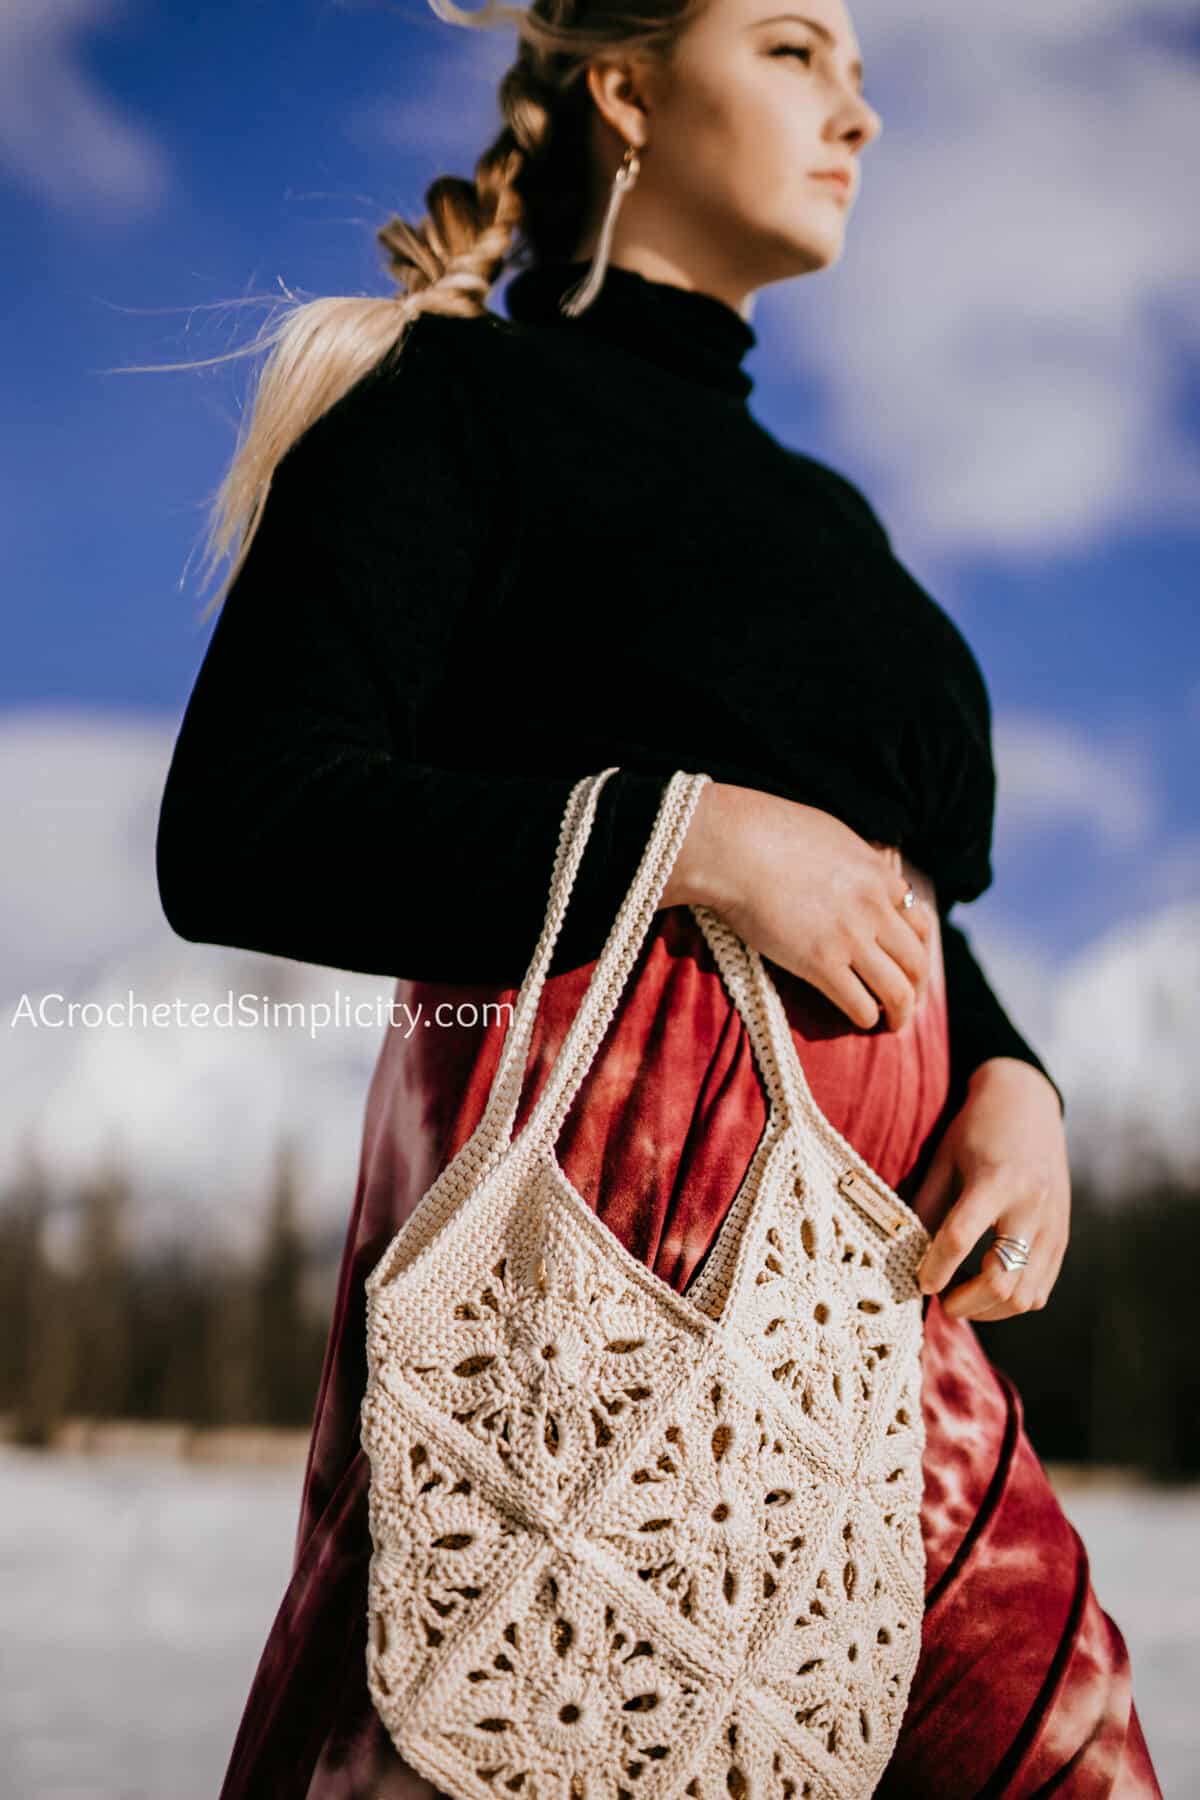 Make a Free Crochet Tote Bag Pattern - Daisy Cottage Designs